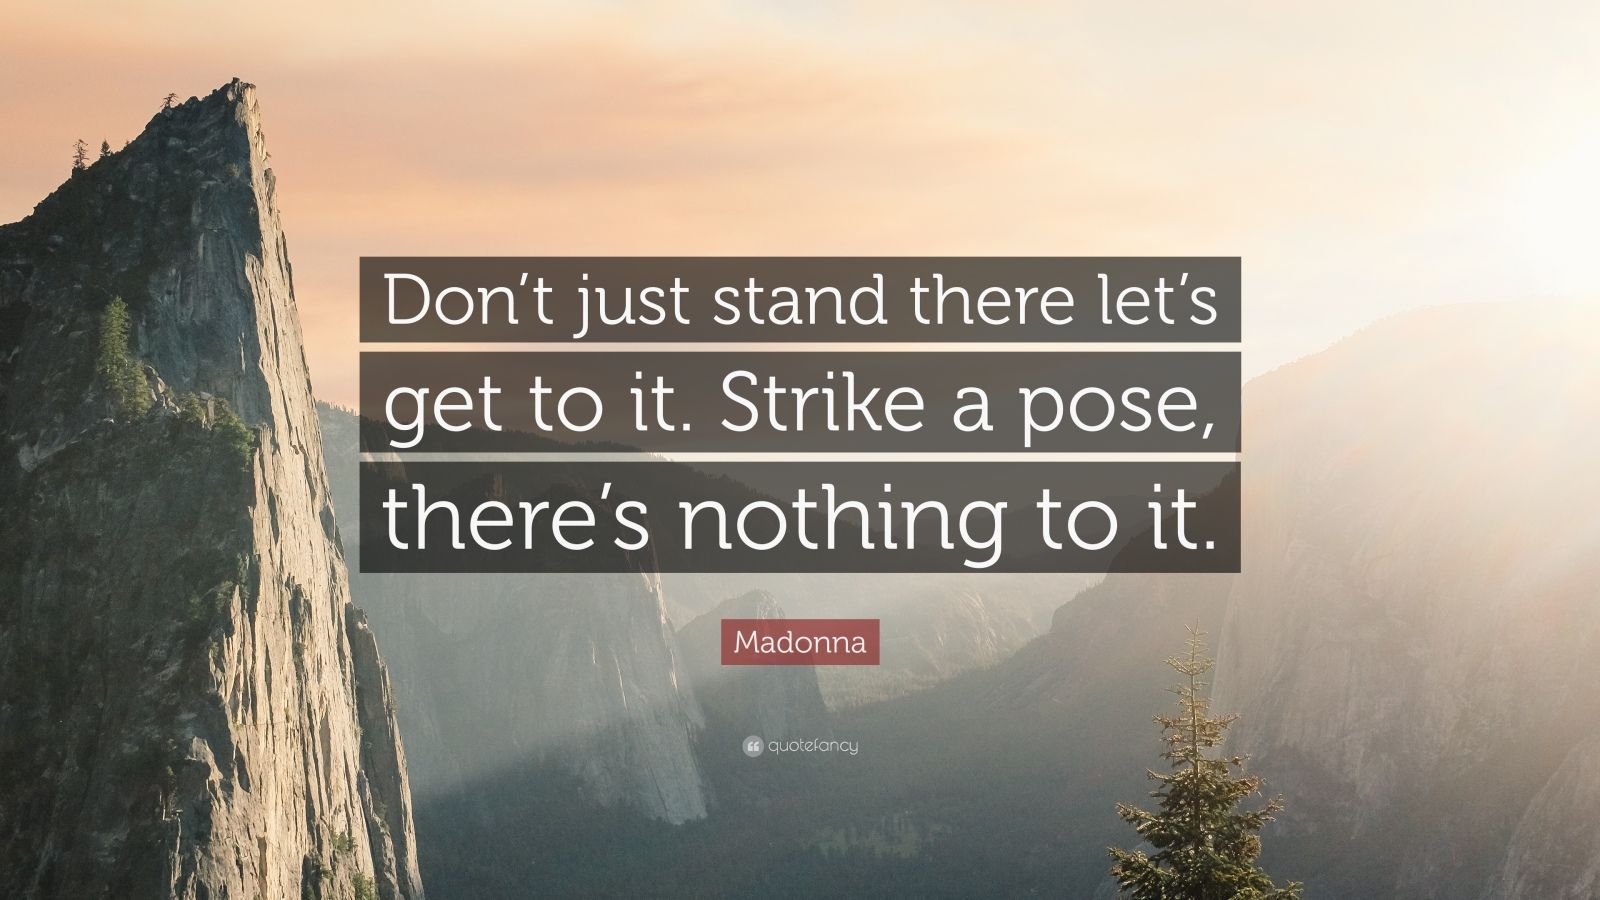 502281 Madonna Quote Don t just stand there let s get to it Strike a pose